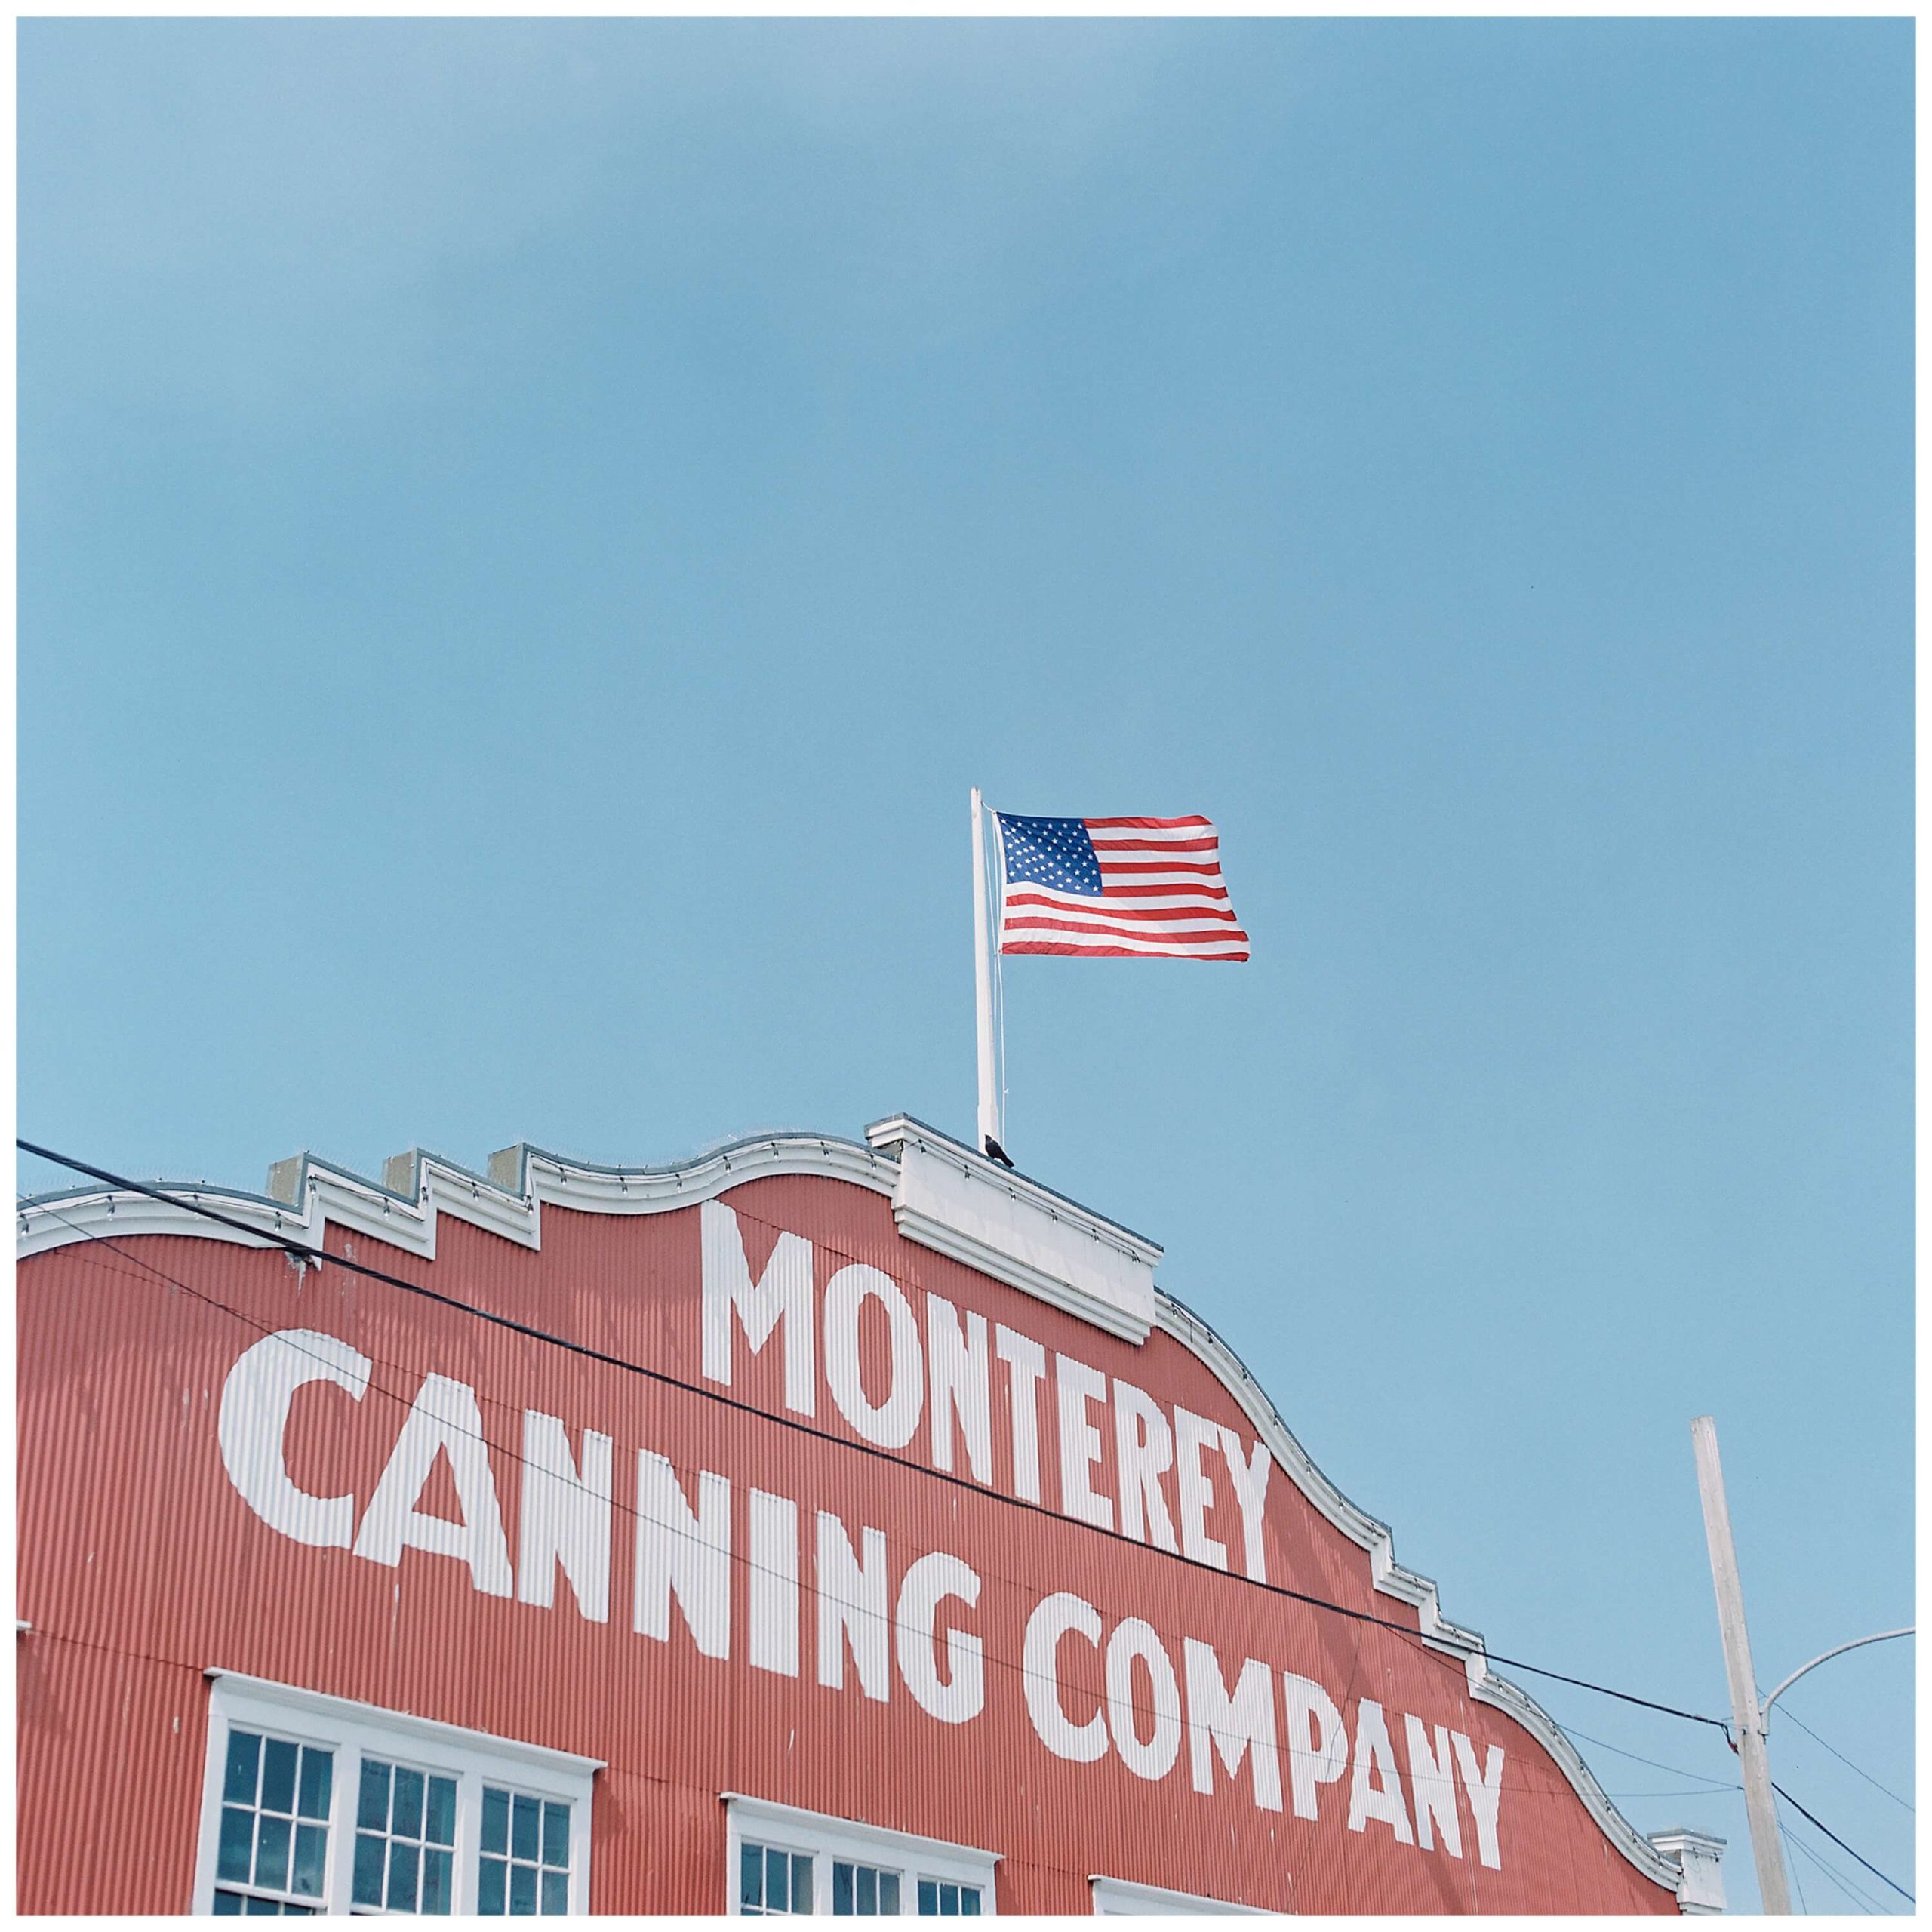 The iconic red building on Cannery Row in Monterey reads "Monterey Canning Company" in large, capital white letters. An American flag sits centered on the roof against a blue sky.